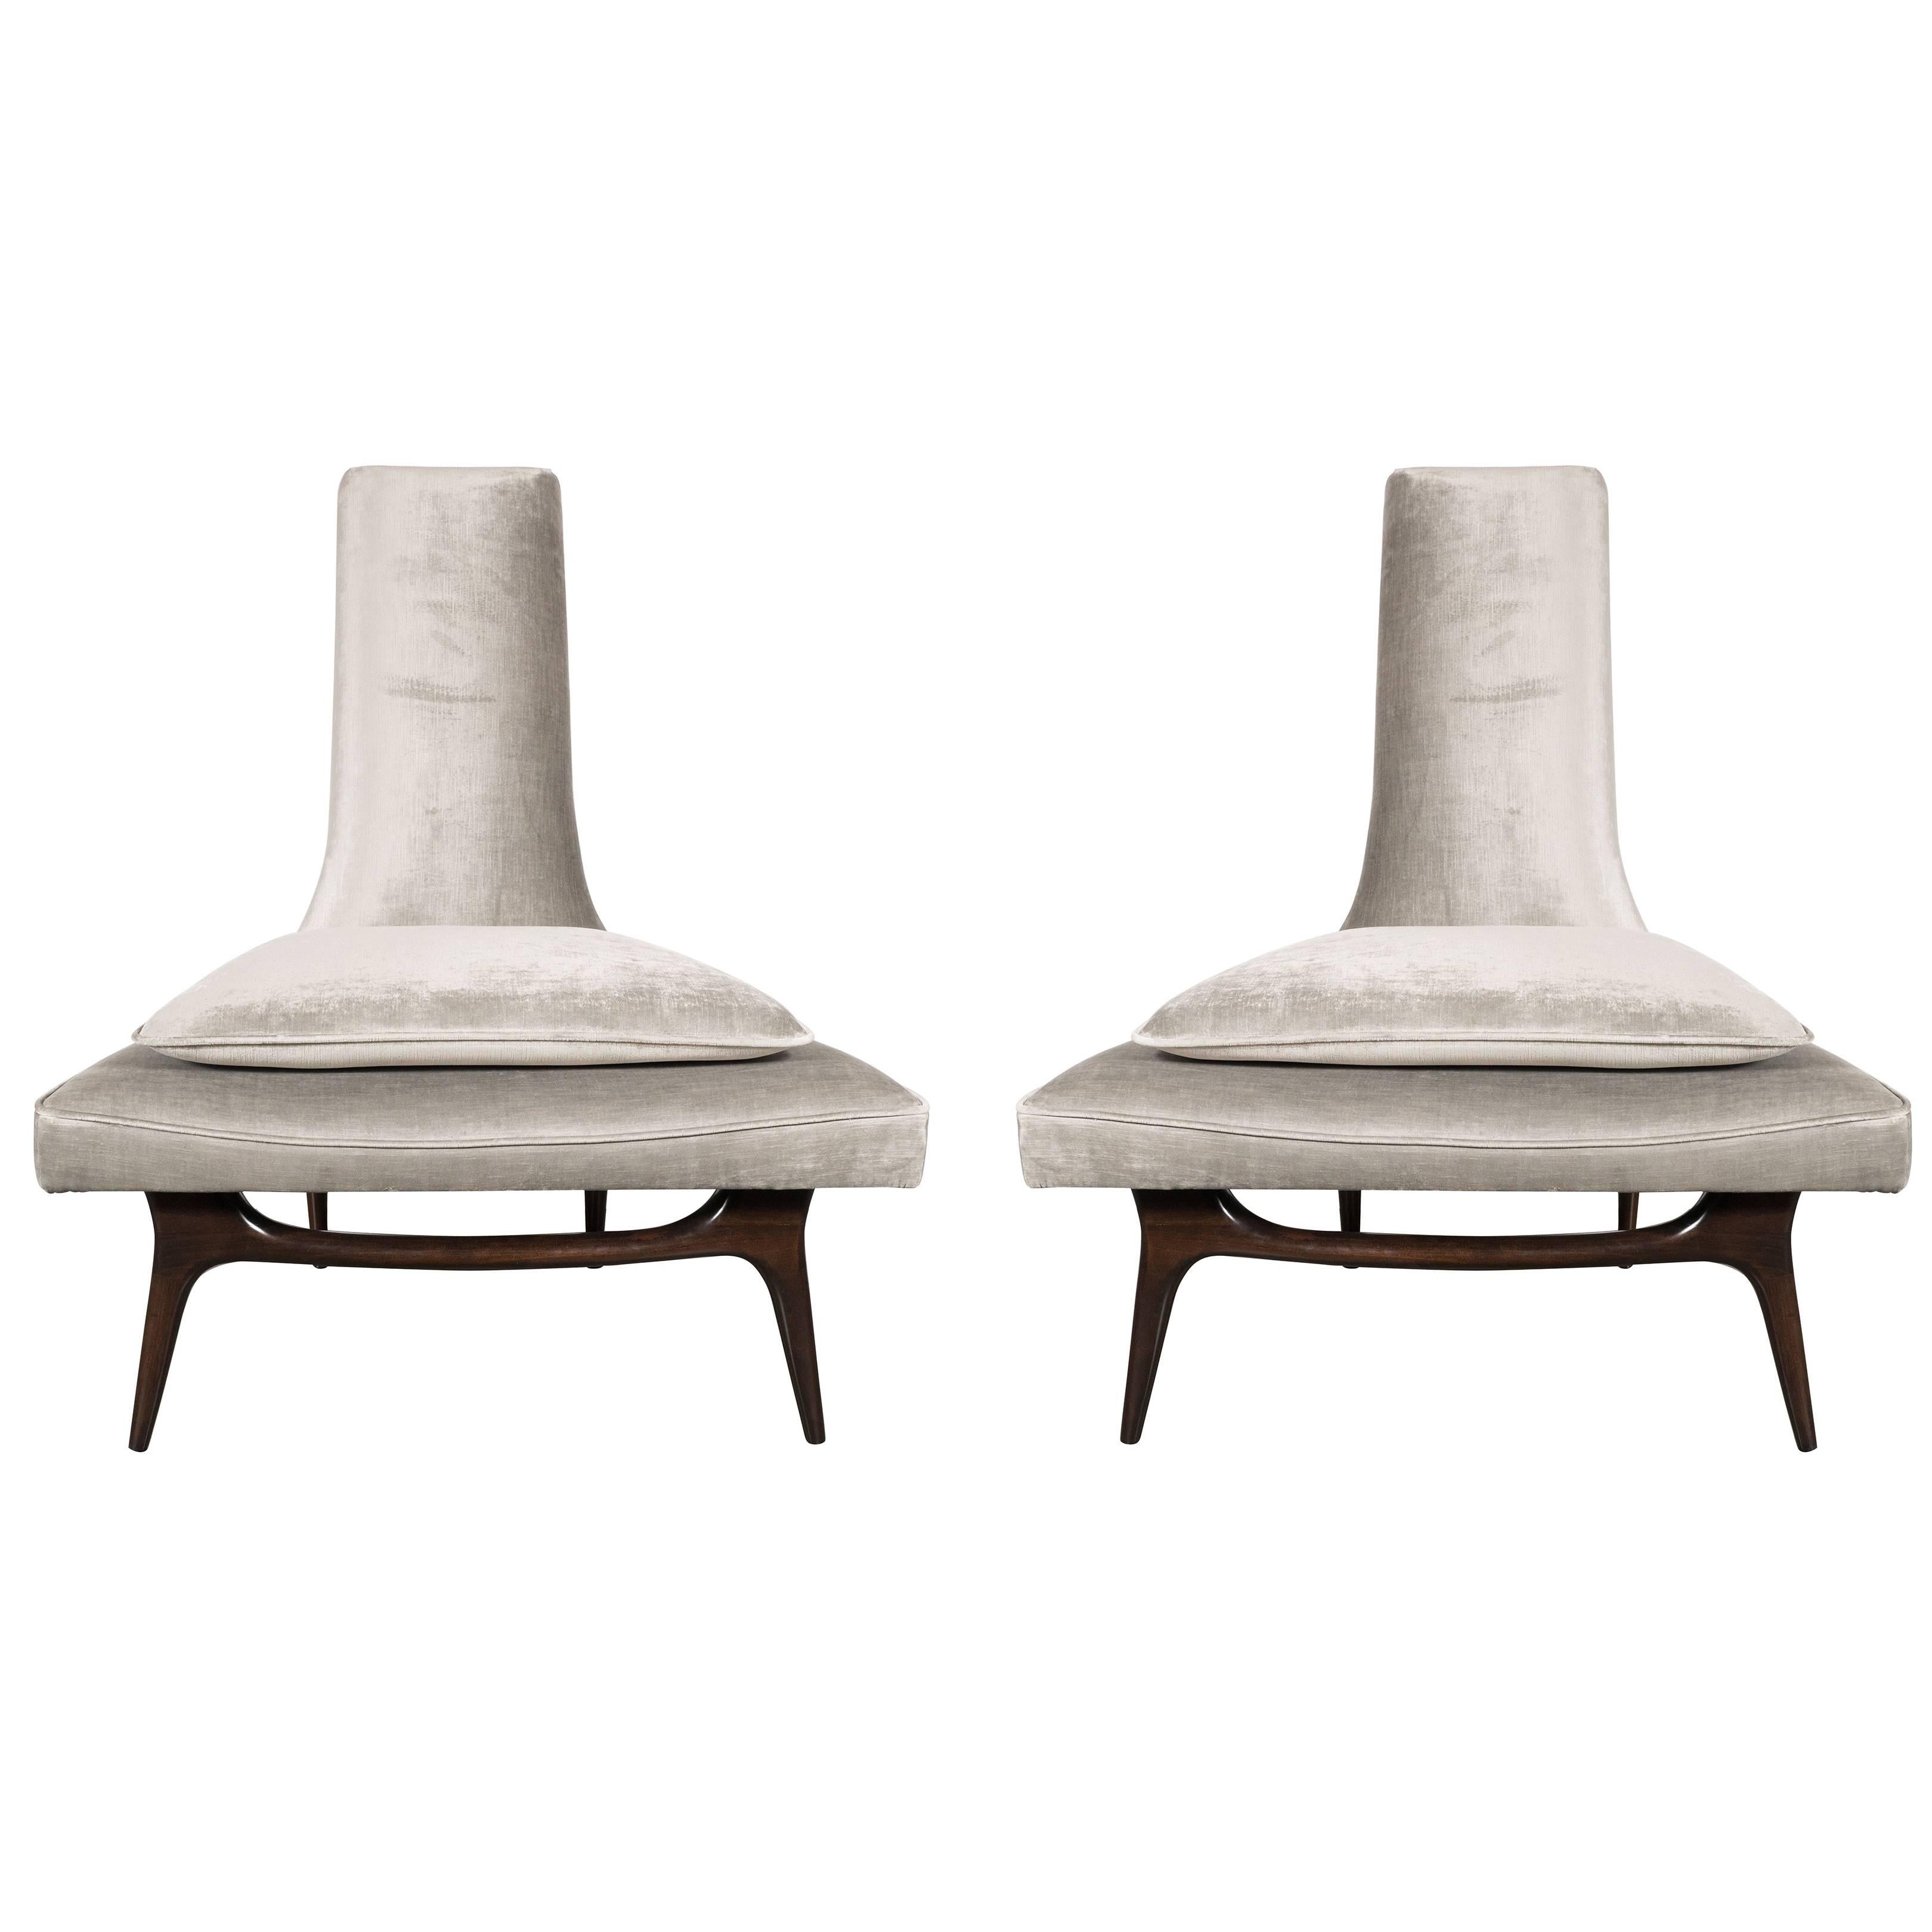 Pair of High Back Lounge Chairs in Smoked Platinum Velvet by Karpen